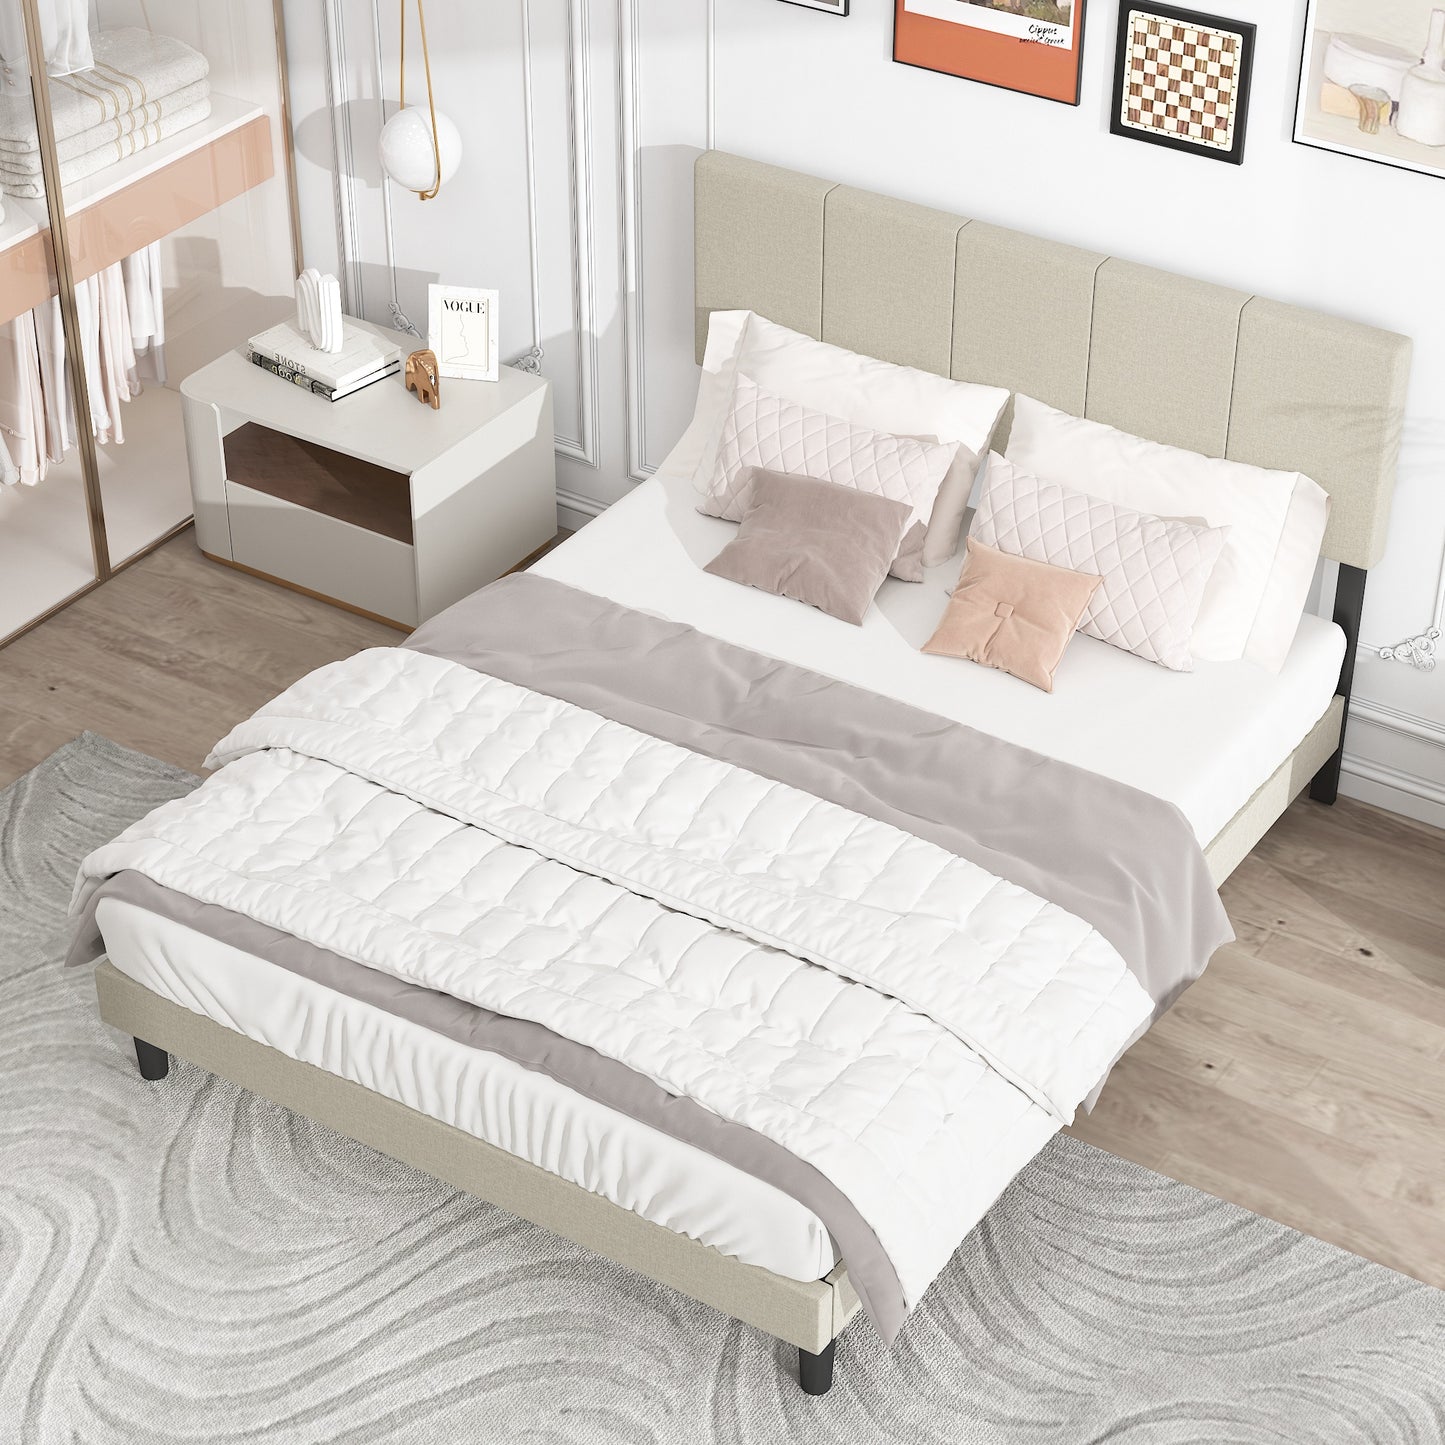 Beige Upholstered Fabric Platform Bed Frame Queen Size with Elegant Headboard, Metal Frame Mattress Foundation with Strong Wooden Slat Support